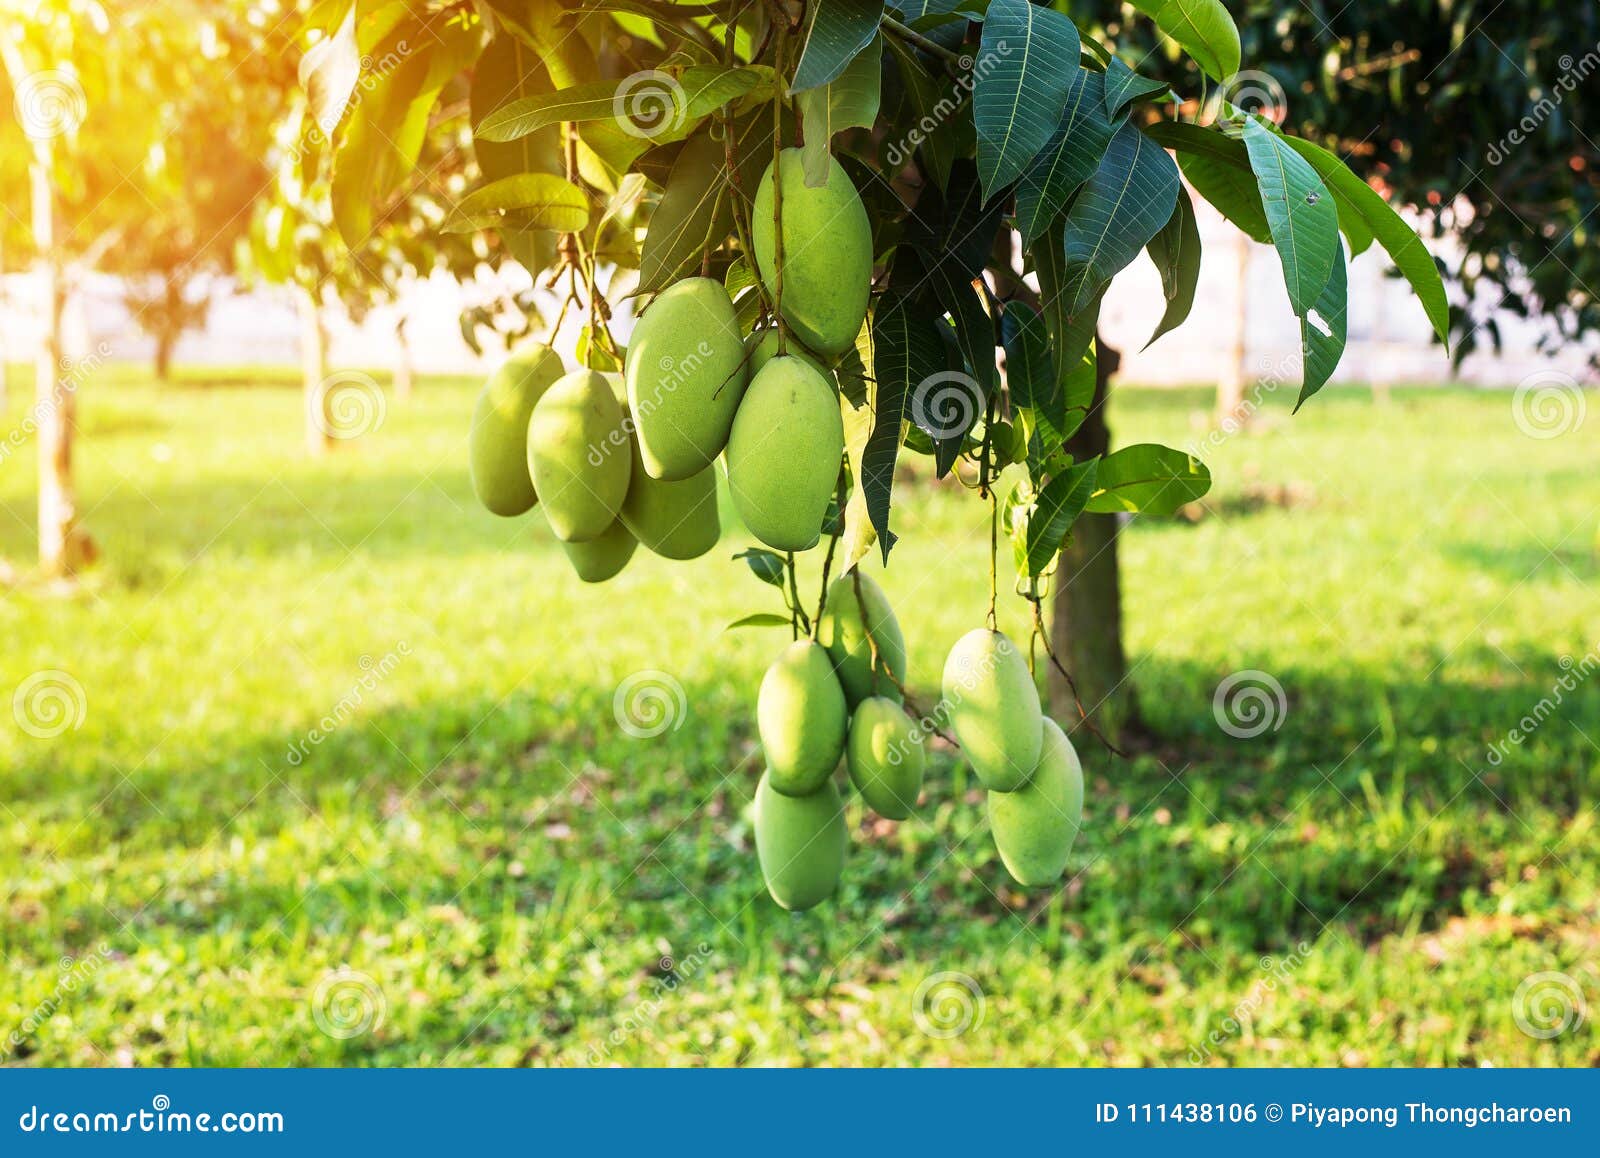 mango on the tree,fresh fruit hanging from branches,bunch of green and ripe mango